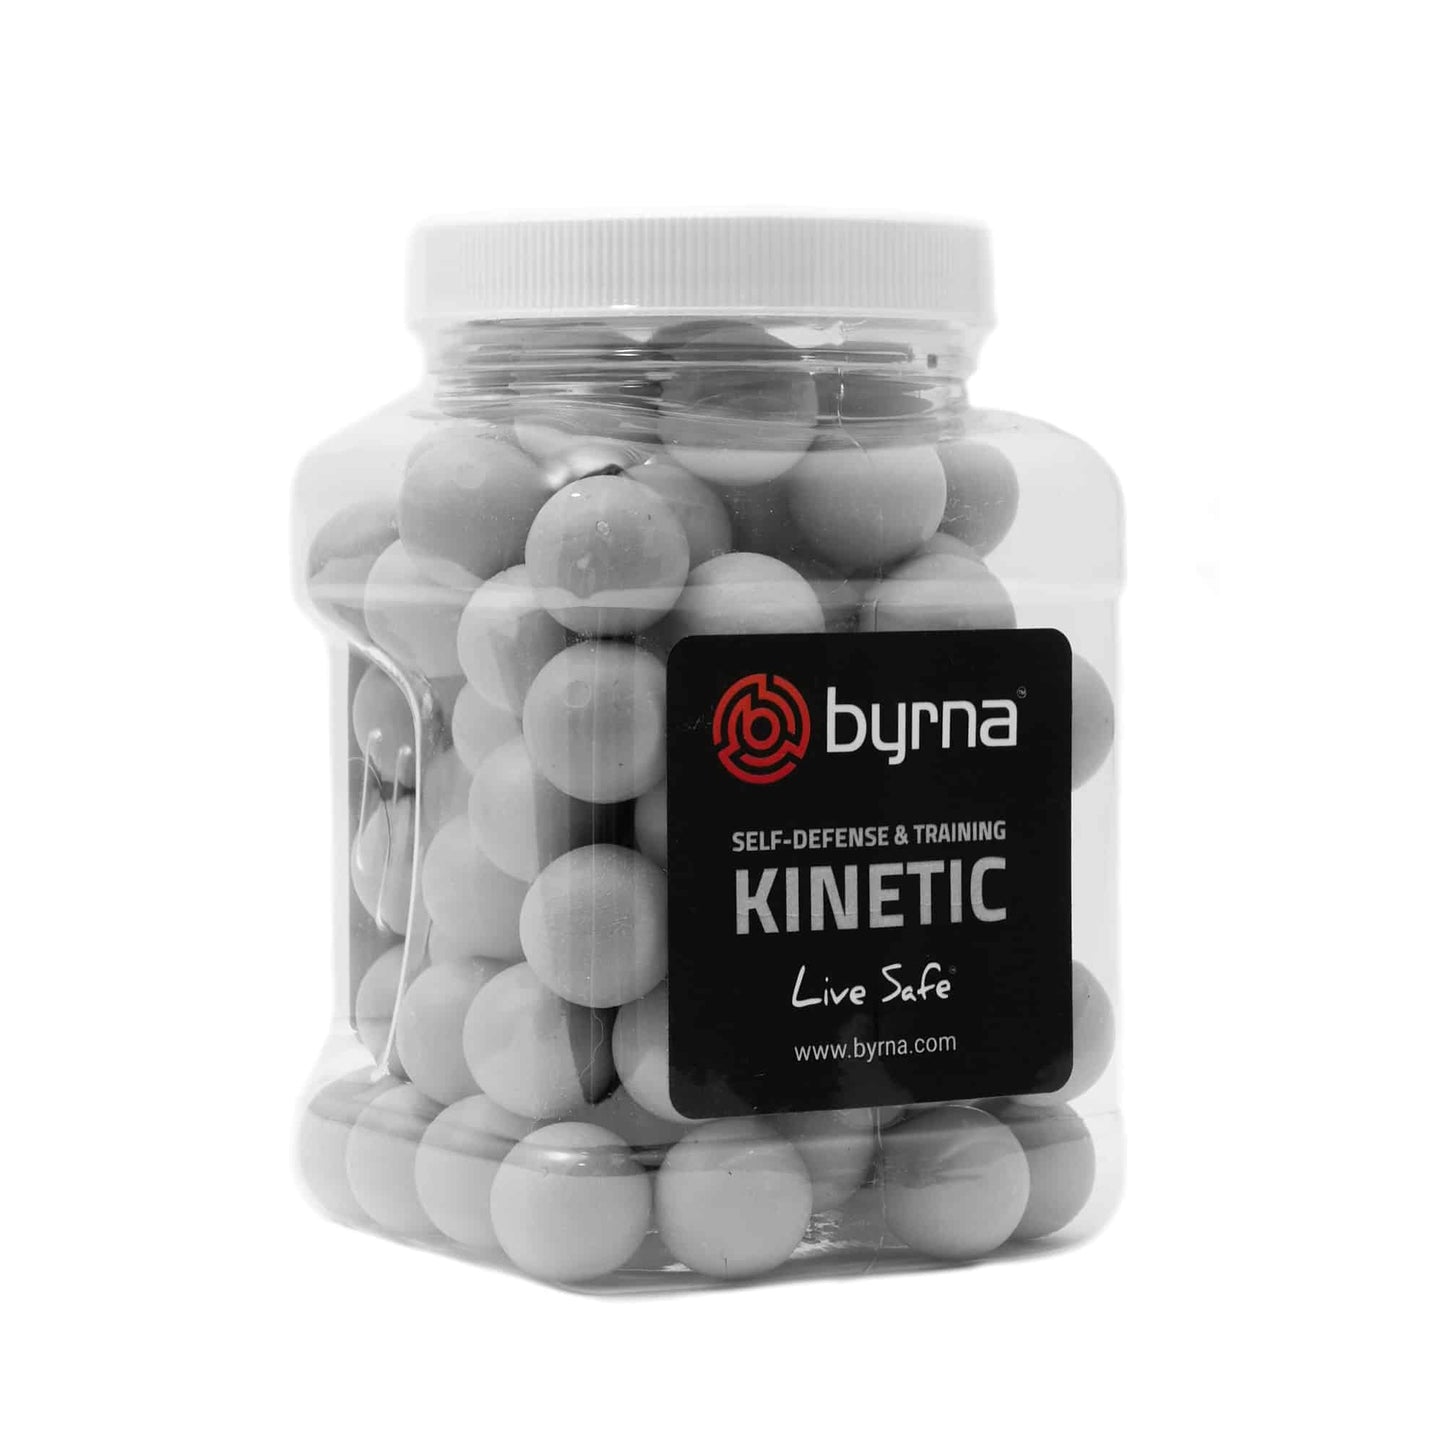 Byrna HD Kinetic Projectiles - 95 Count